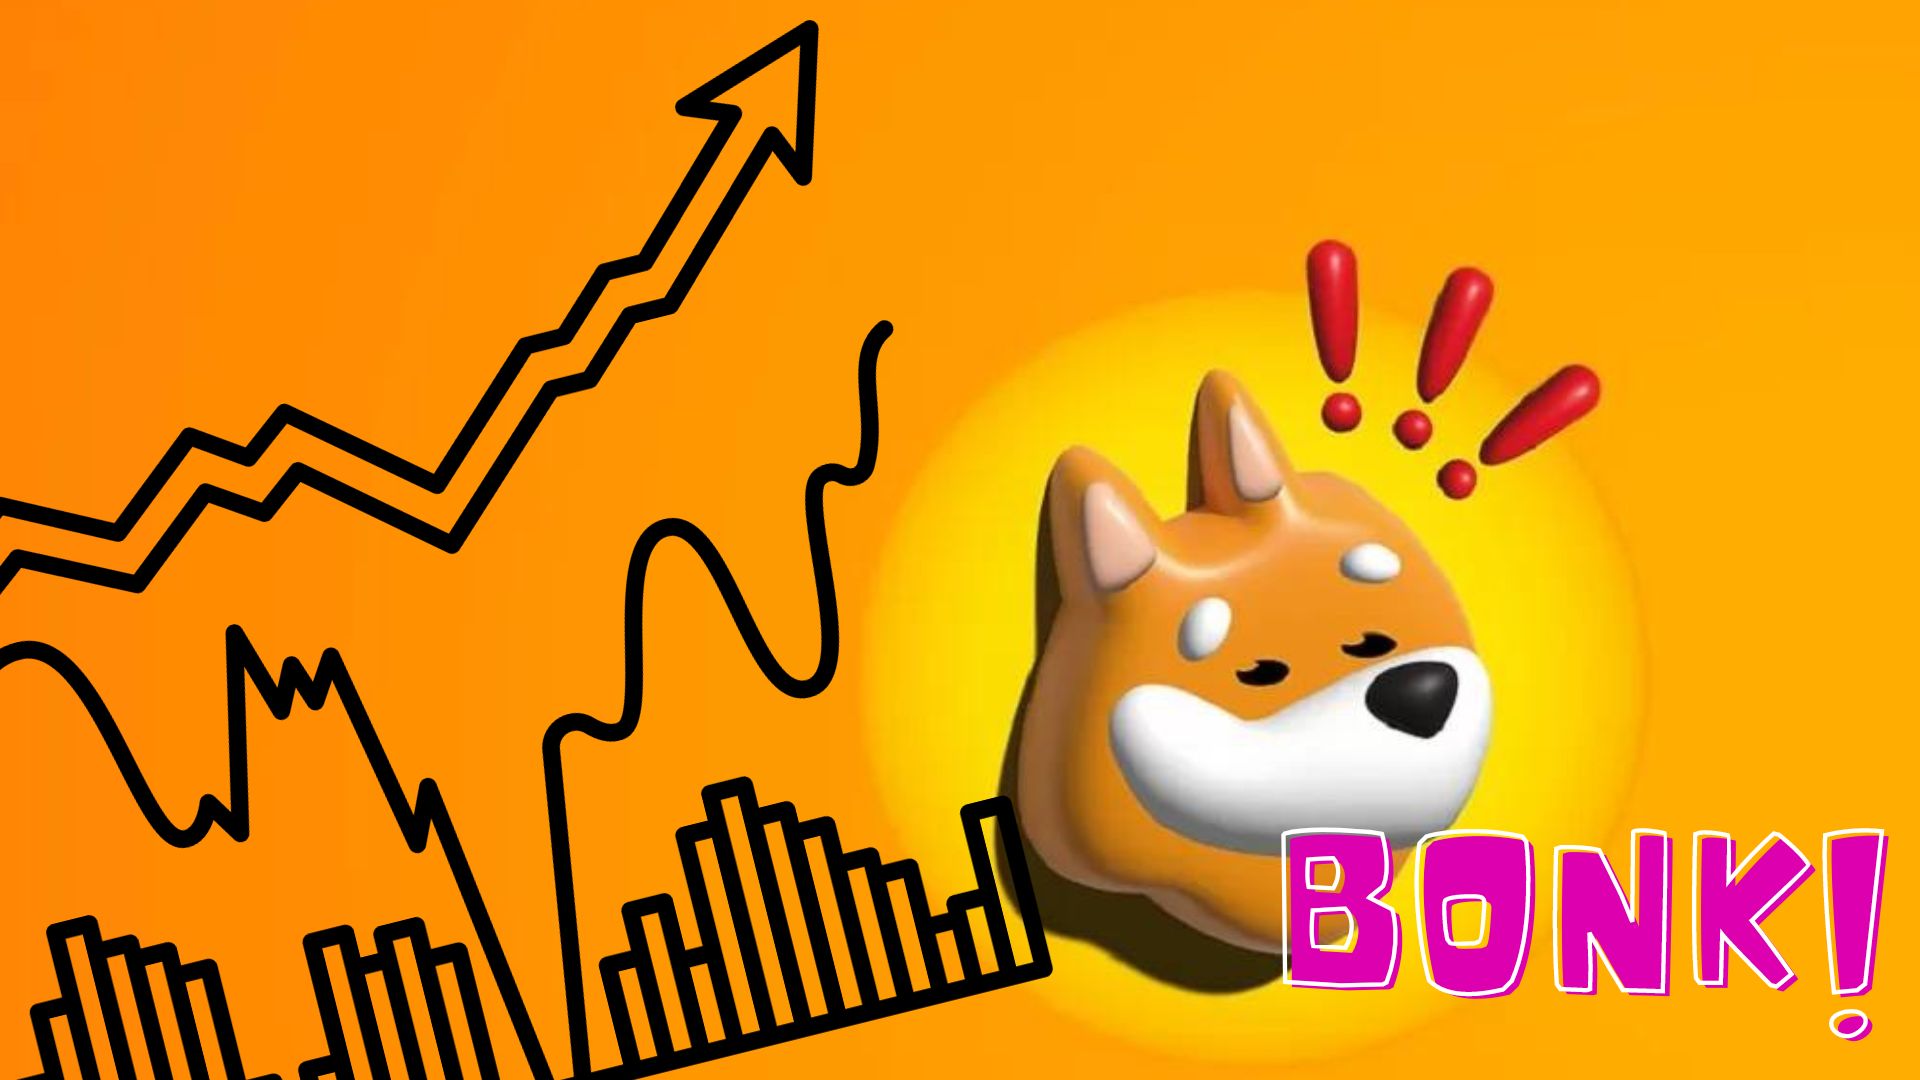 Picture of Bonk Coin dog logo next to an uptrending stock chart showing the recent spike